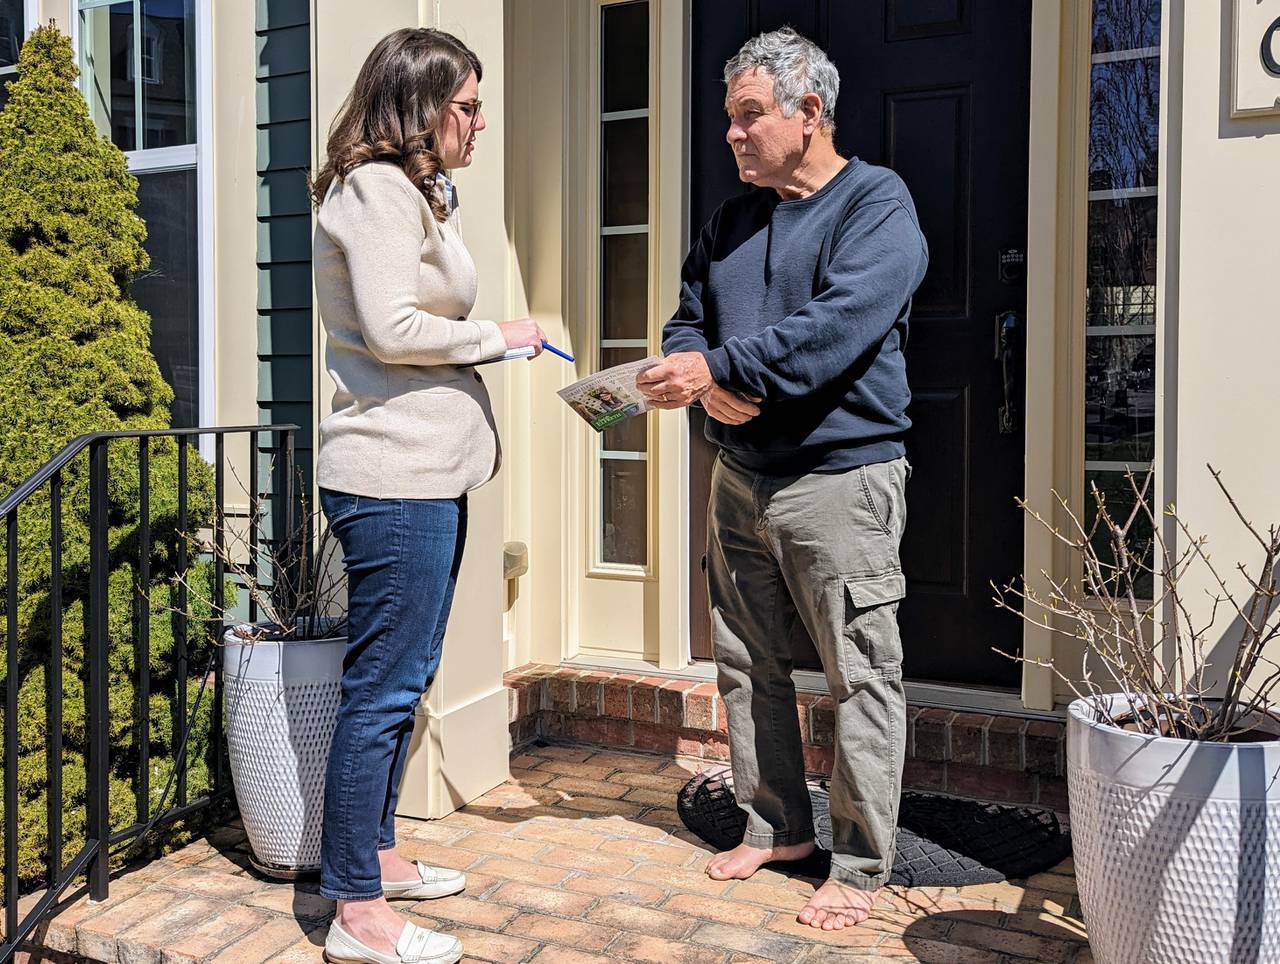 State Sen. Sarah Elfreth, one of almost 20 Democratic candidates for Congress in the vacant 3rd District, talks with Hampton E. Brown III during a door-knocking swing through Ellicott City on March 24, 2024. She said she has knocked on 10,000 doors on weekends since announcing her campaign. She leaves campaign literature when no one is home. Once the General Assembly session ends in April, that pace will quicken.